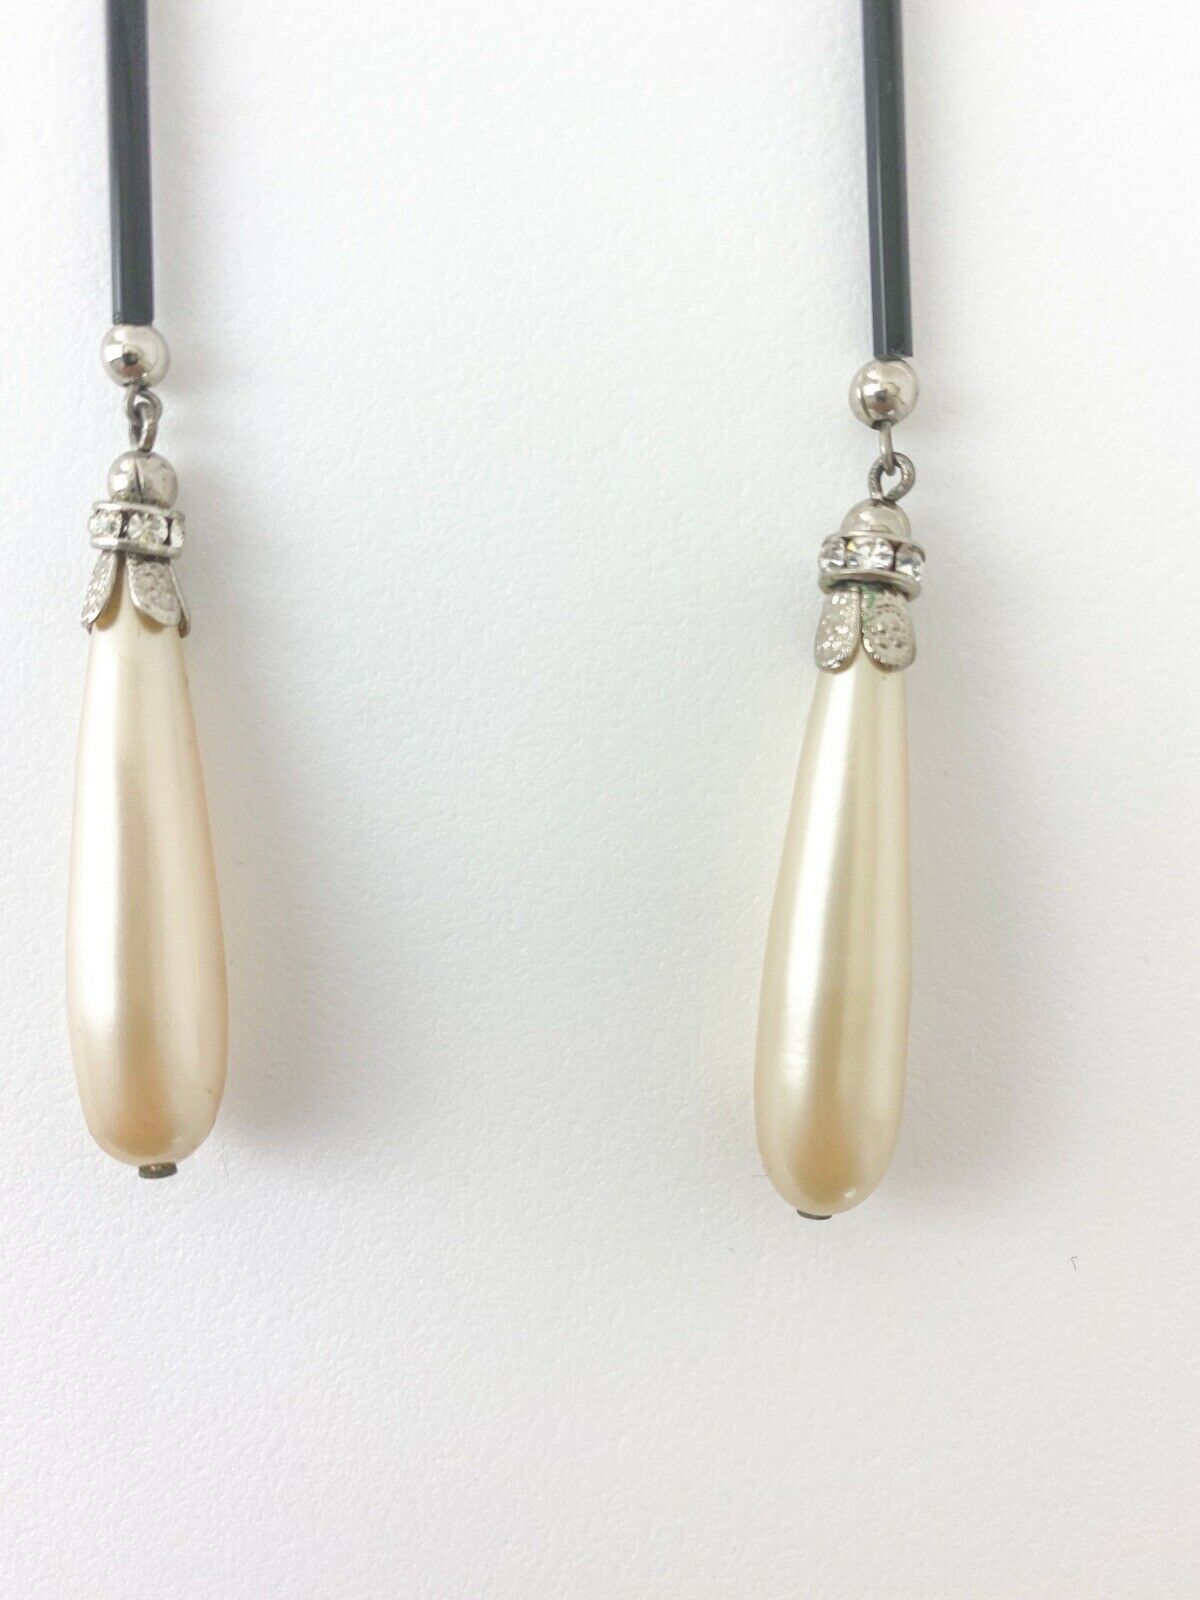 【SOLD OUT】Christian Dior Boutique Long Dangling Earrings Faux Pearls Rhinestones Vintage